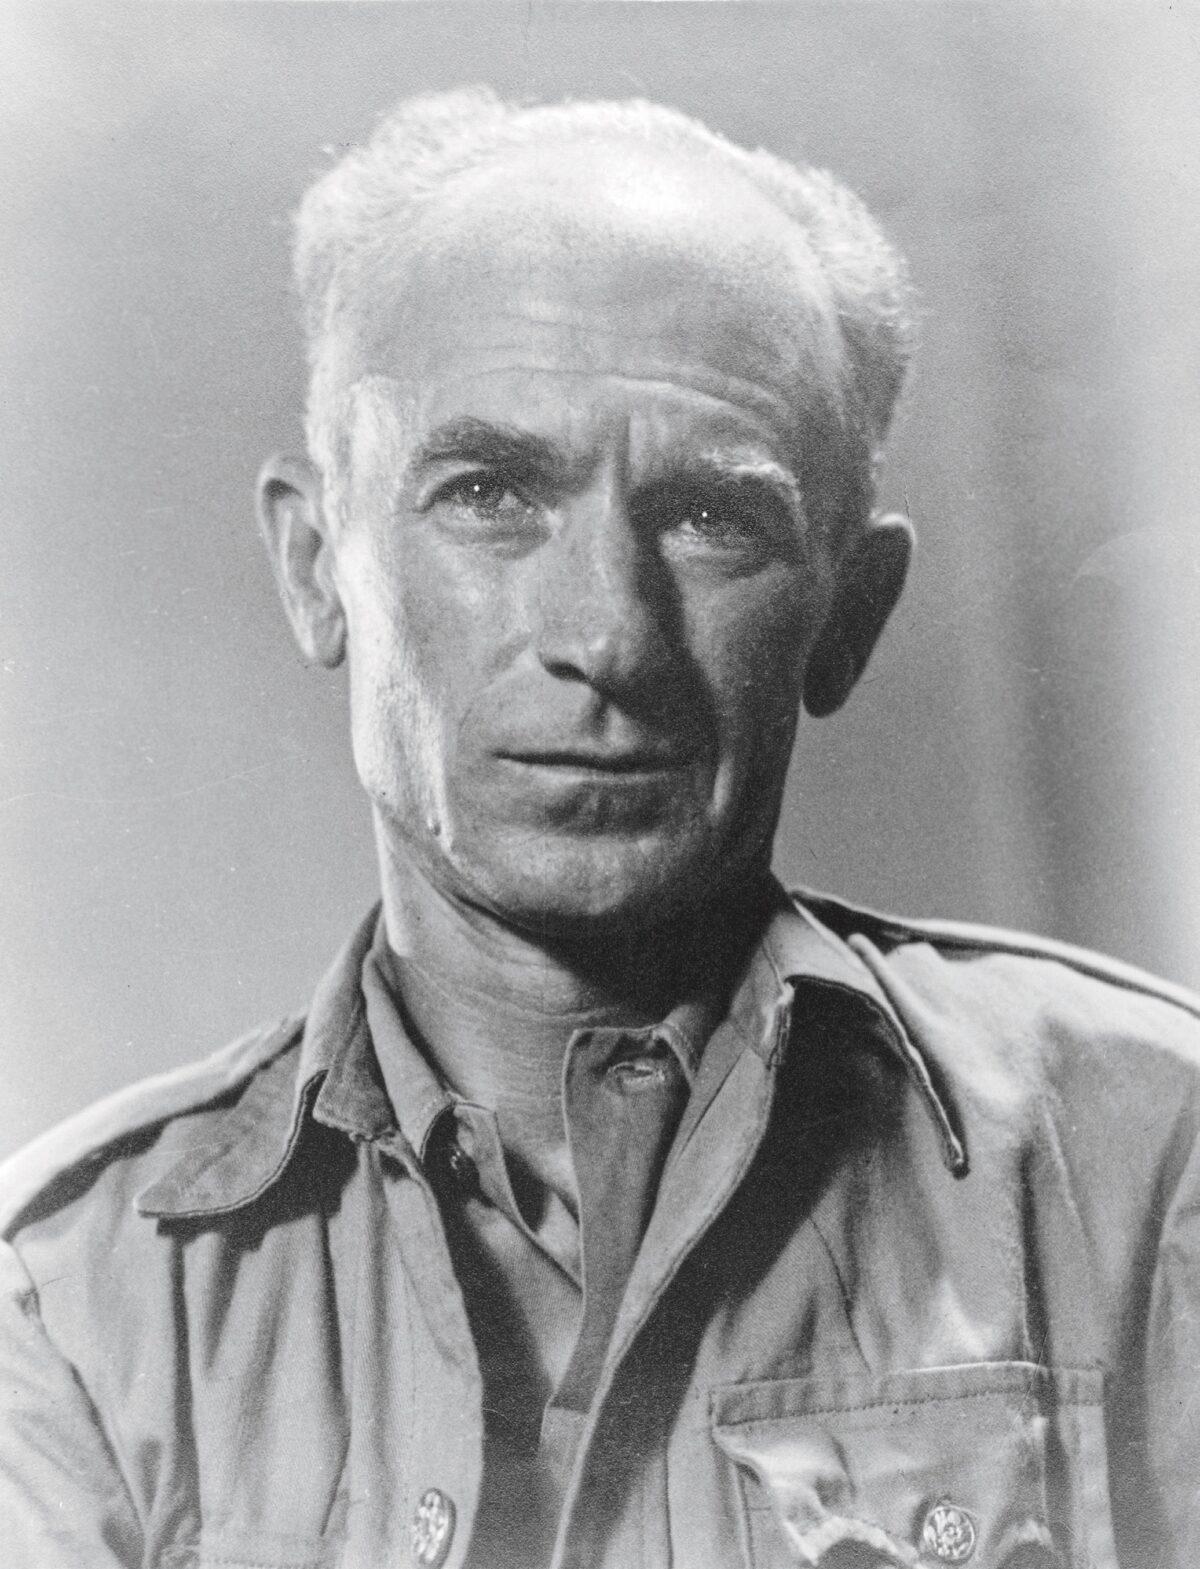 Portrait of journalist Ernie Pyle, photographed by Milton J. Pike on May 16, 1945. (Public Domain)